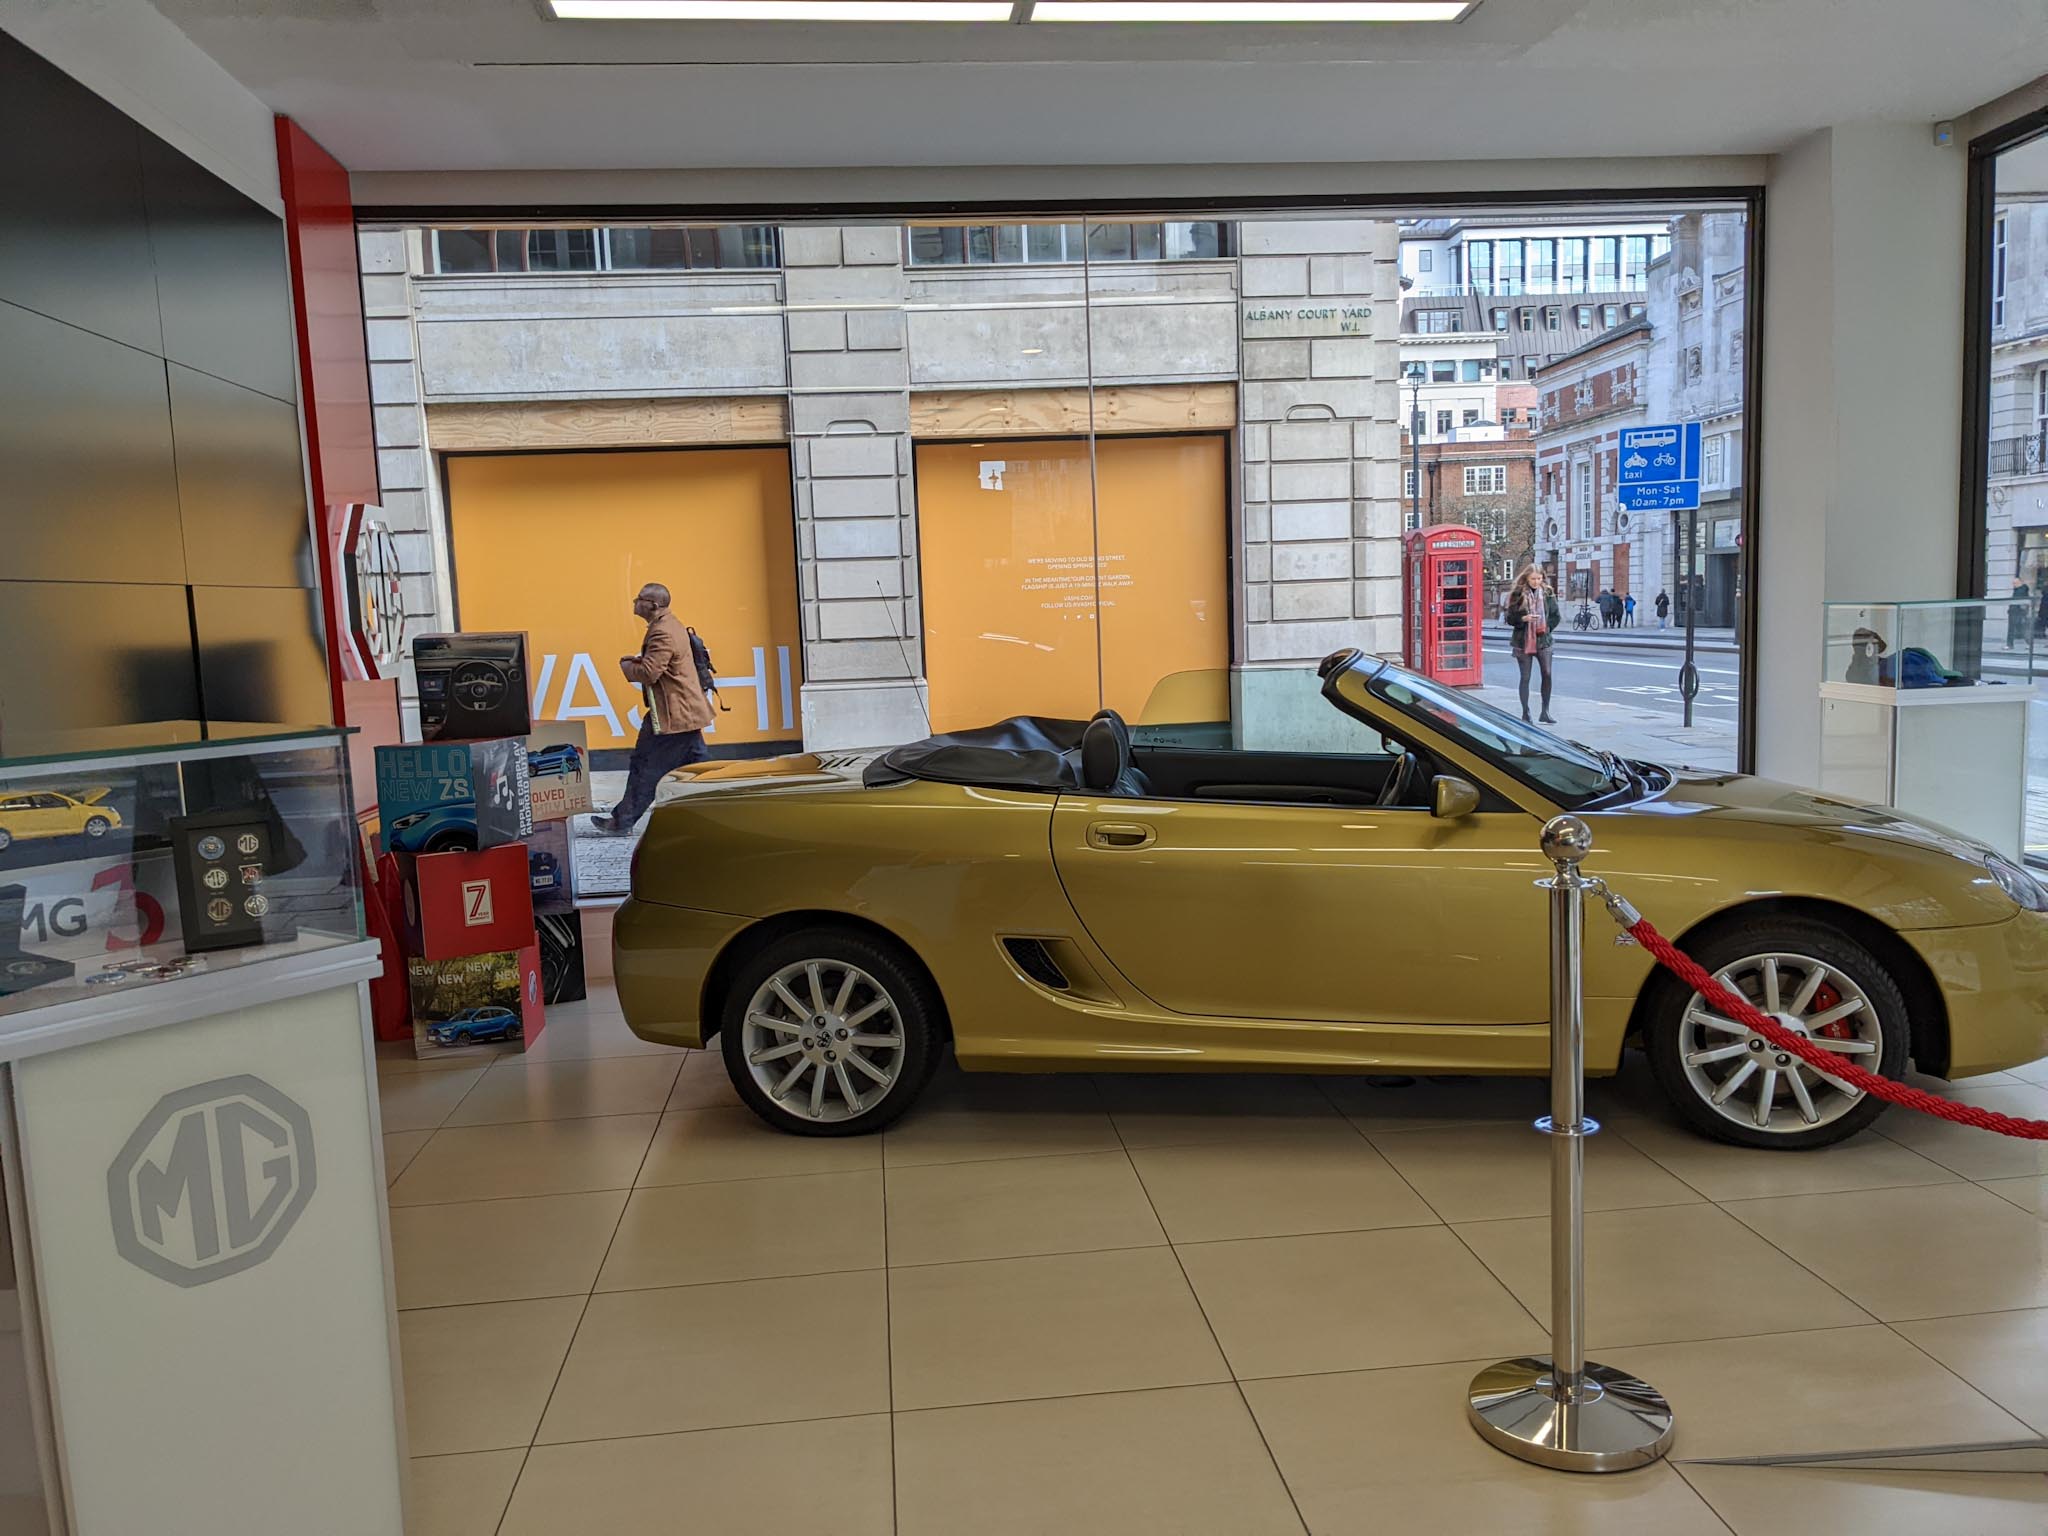 The Queen's Golden Jubilee MG TF was the 1.5 millionth MG. It was inside the MG store near Piccadilly Circus in London. 